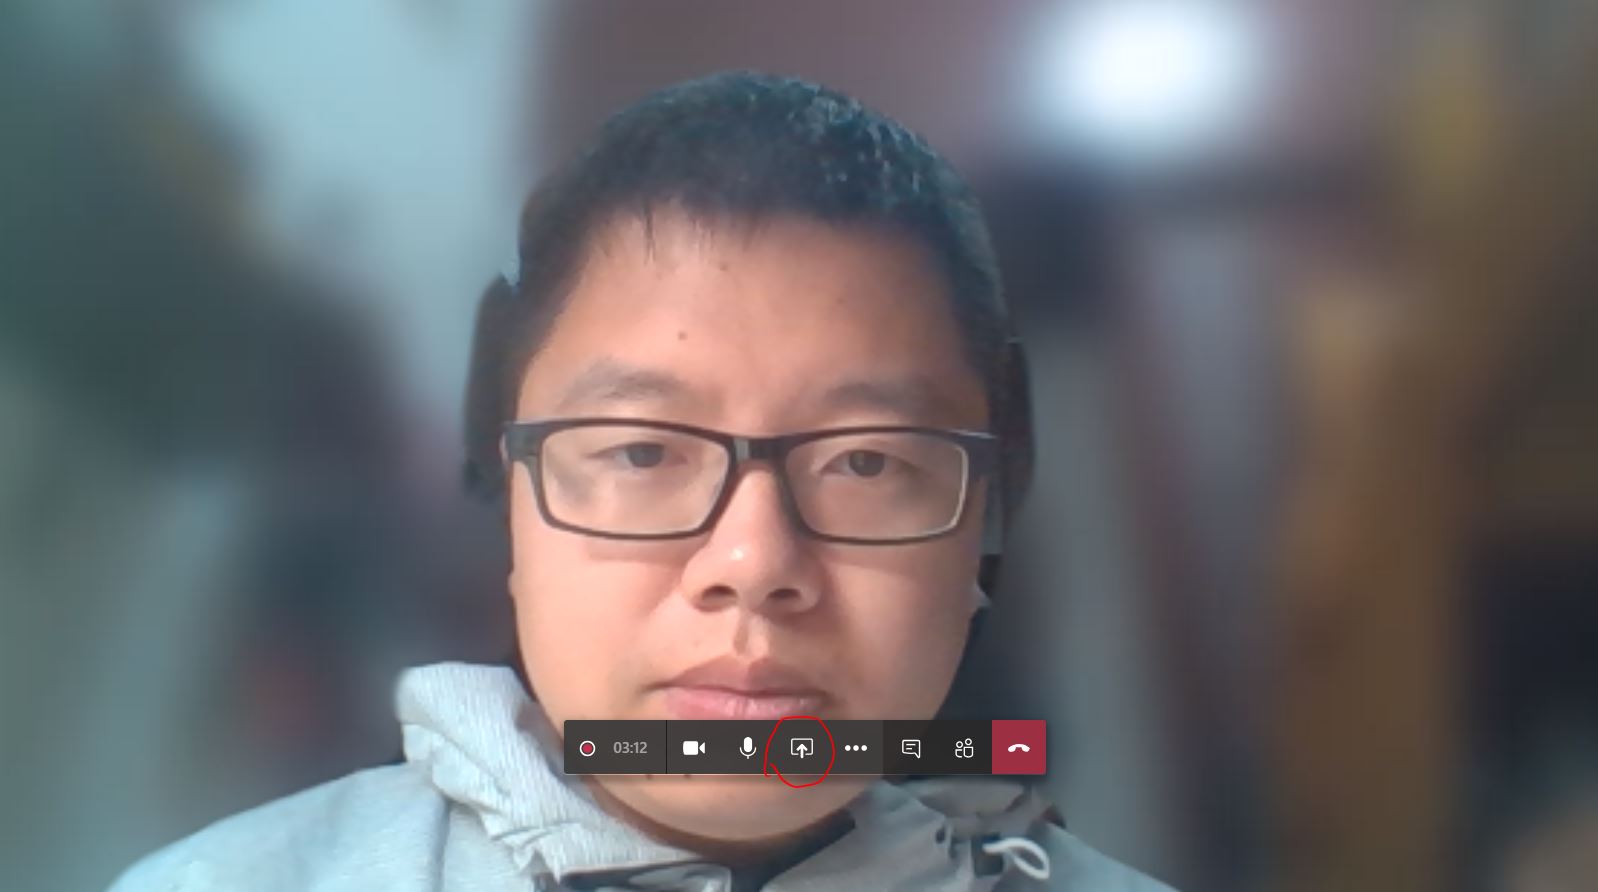 A person wearing glasses and looking at the camera

Description automatically generated